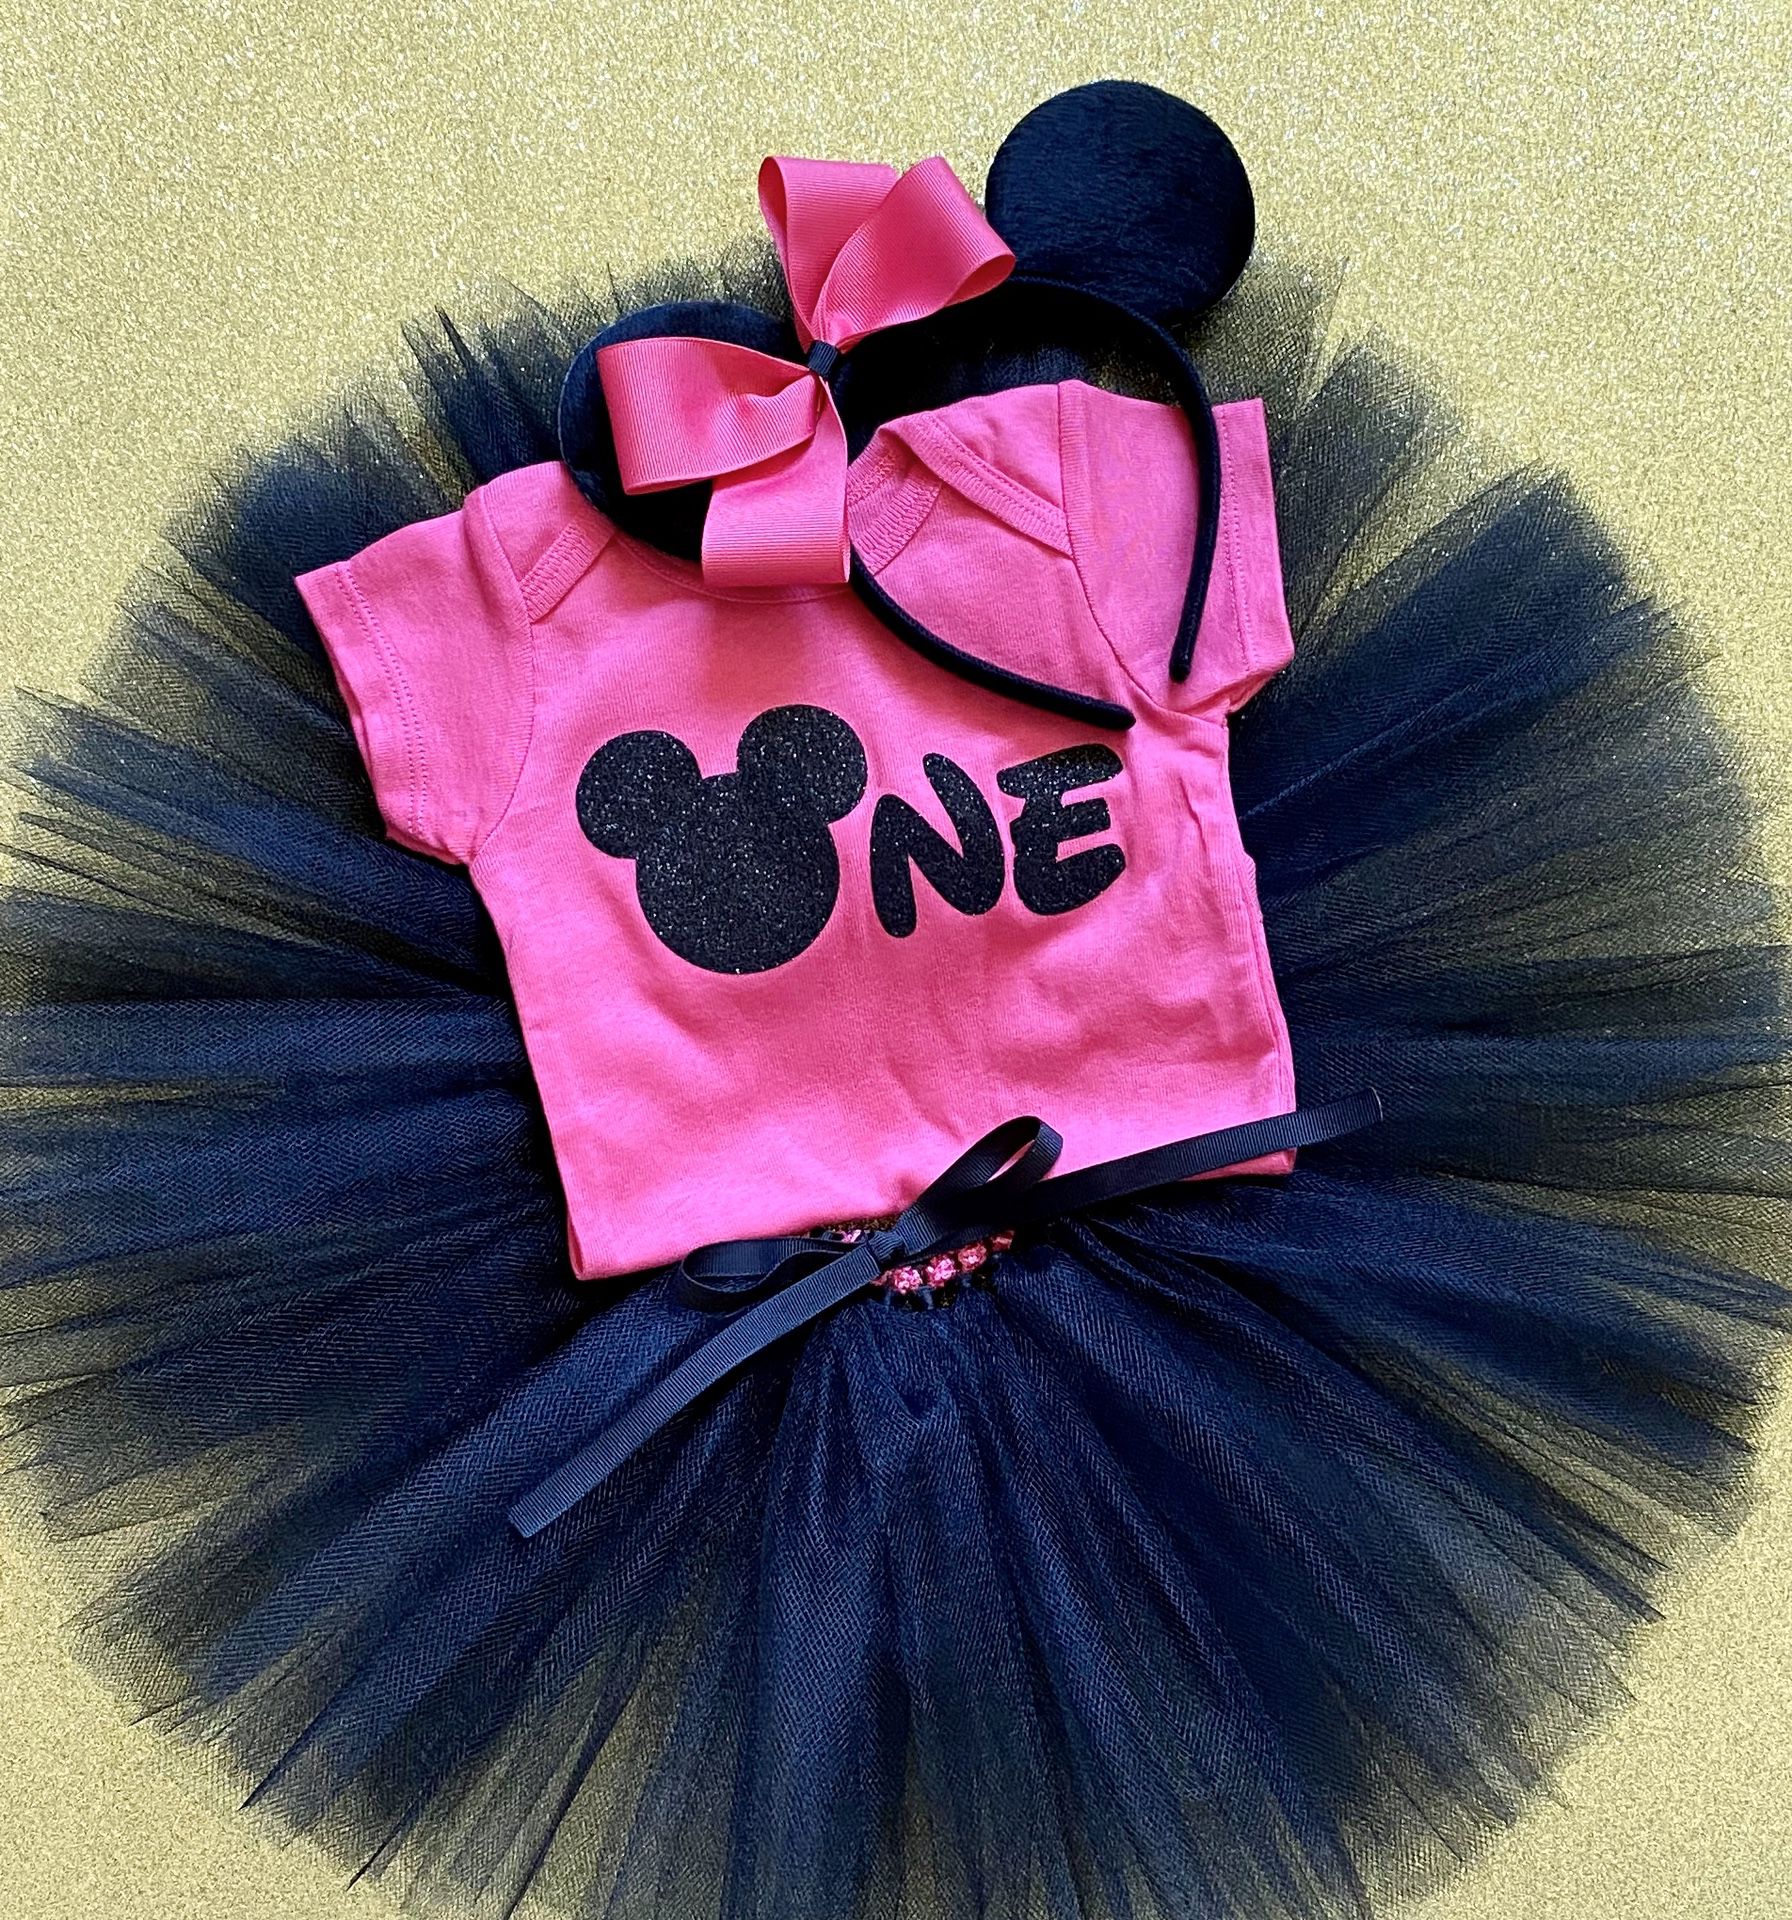 Cute Dark Pink & Black Minnie Mouse 1st Birthday Outfit 💗 12 Months